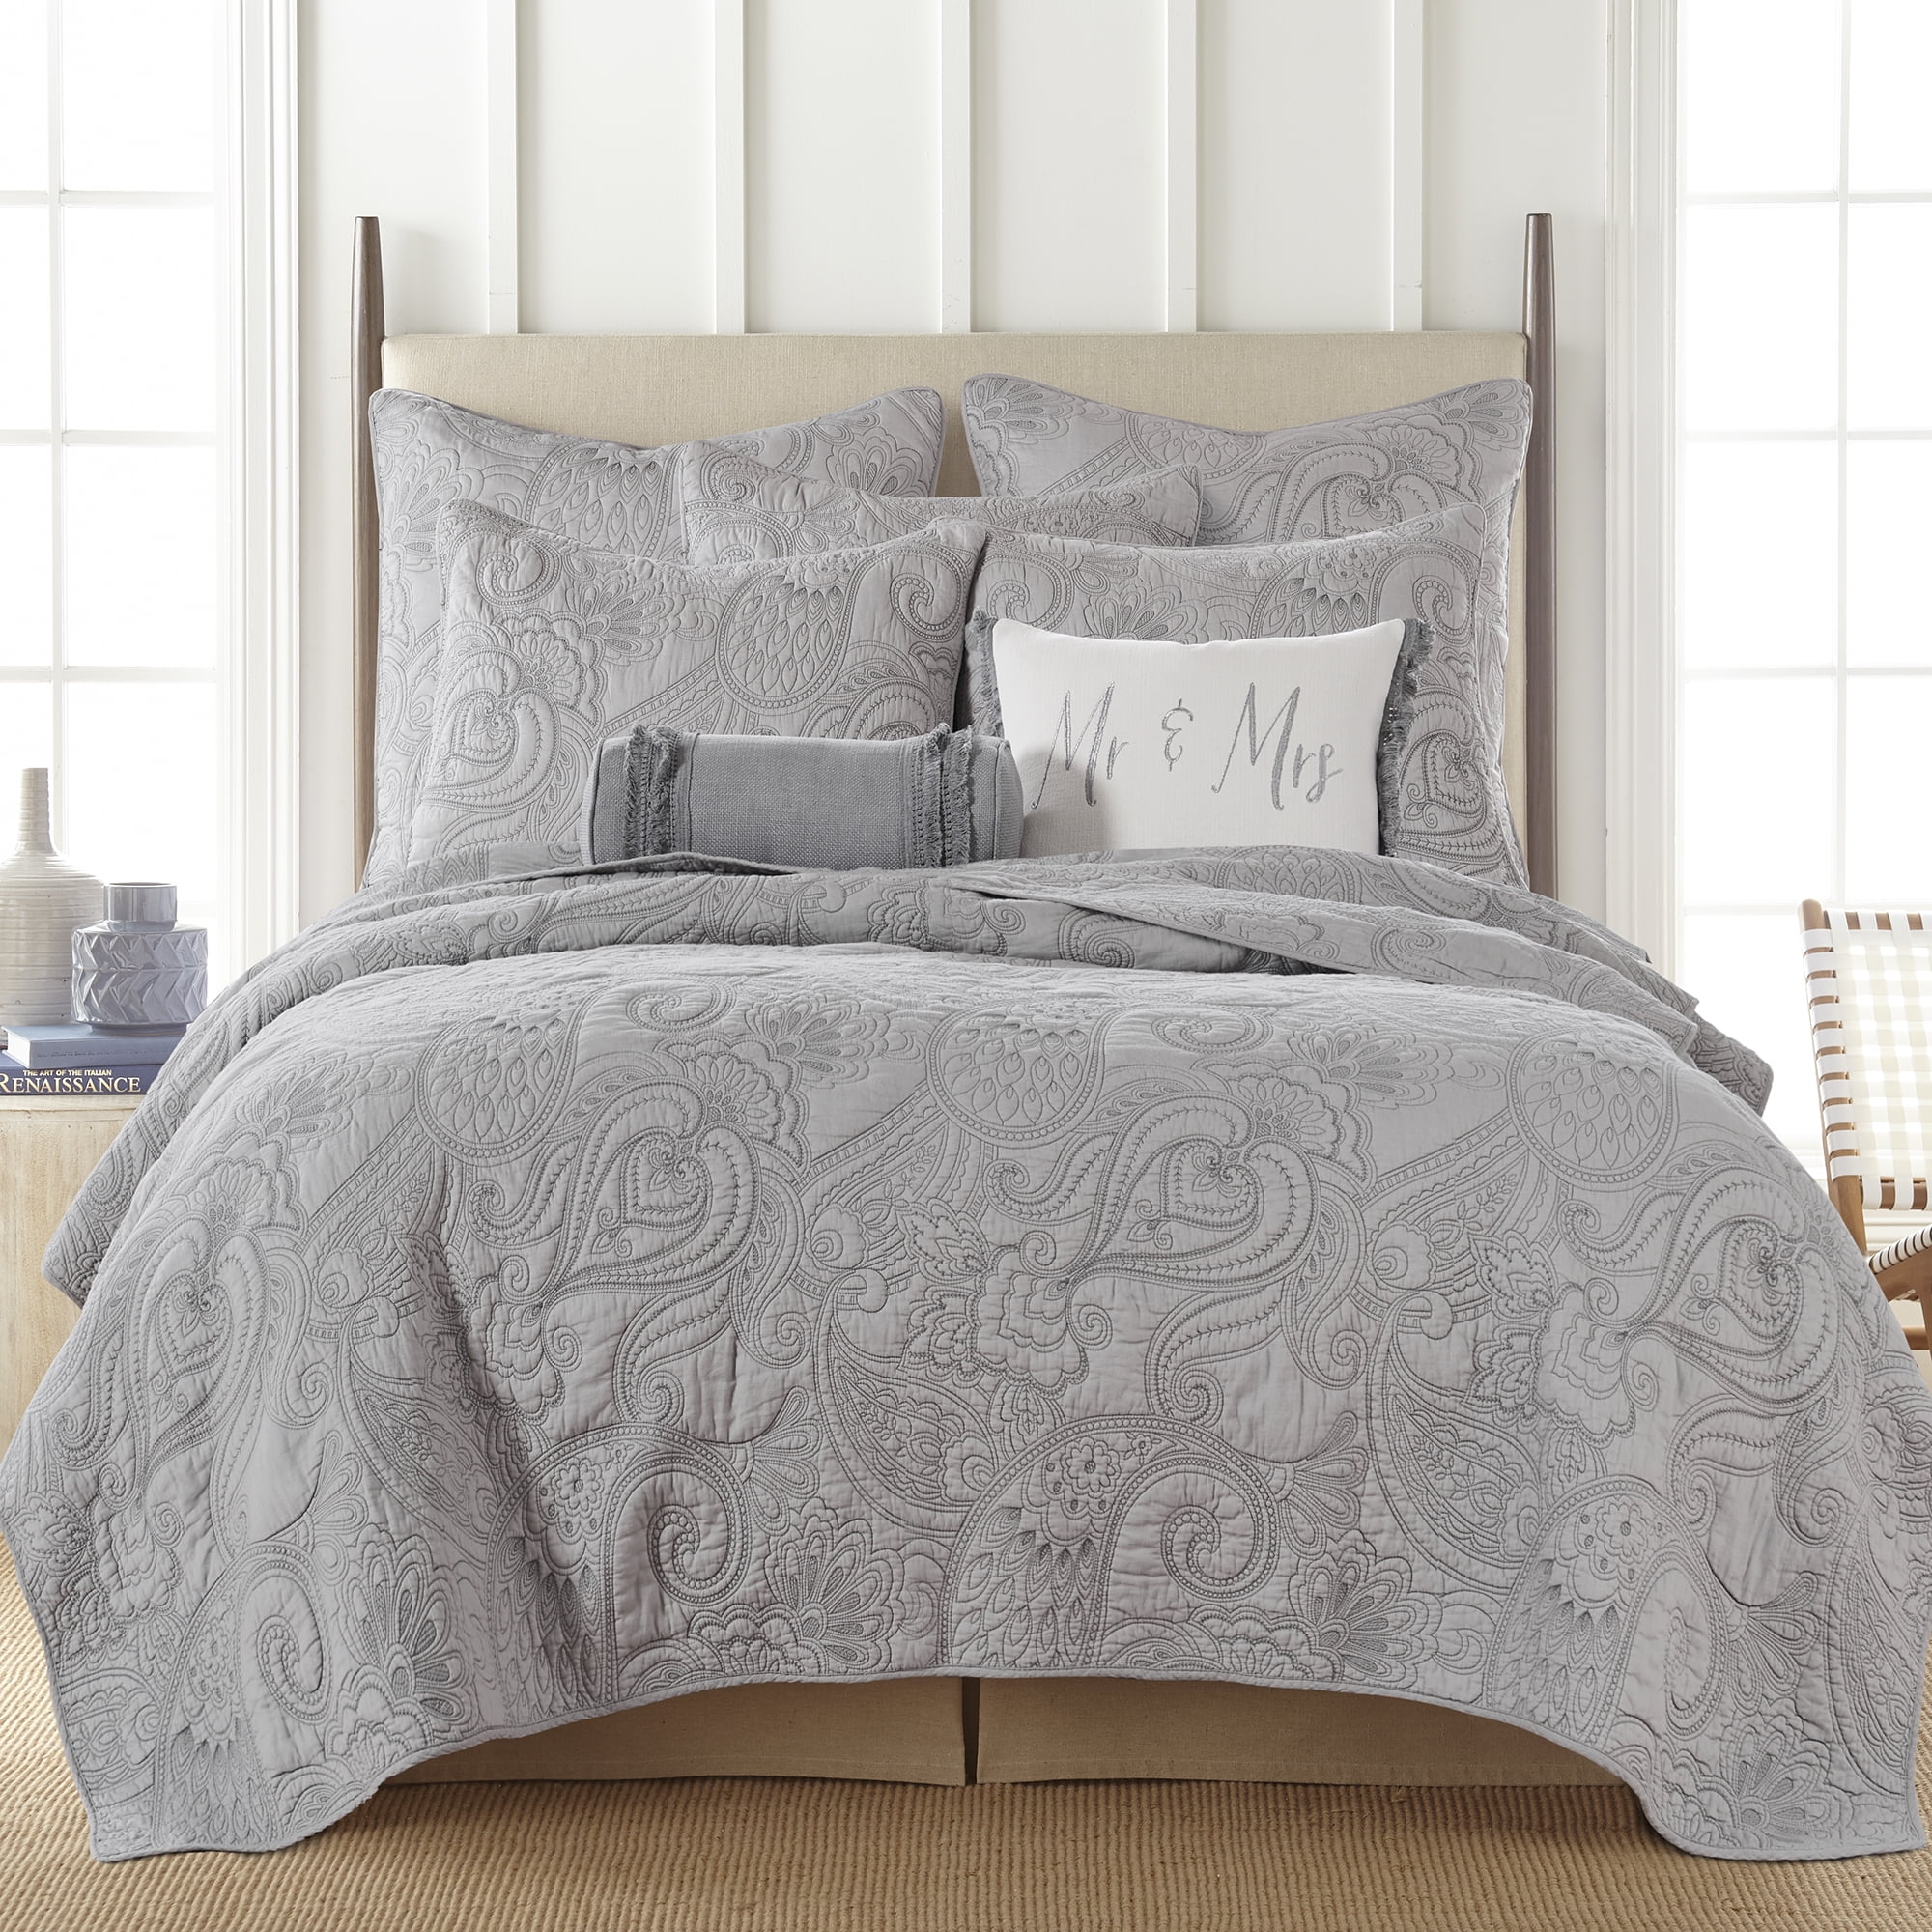 NY&Co. Home Cody 7-Piece Clip Jacquard Cotton Quilt Set, King